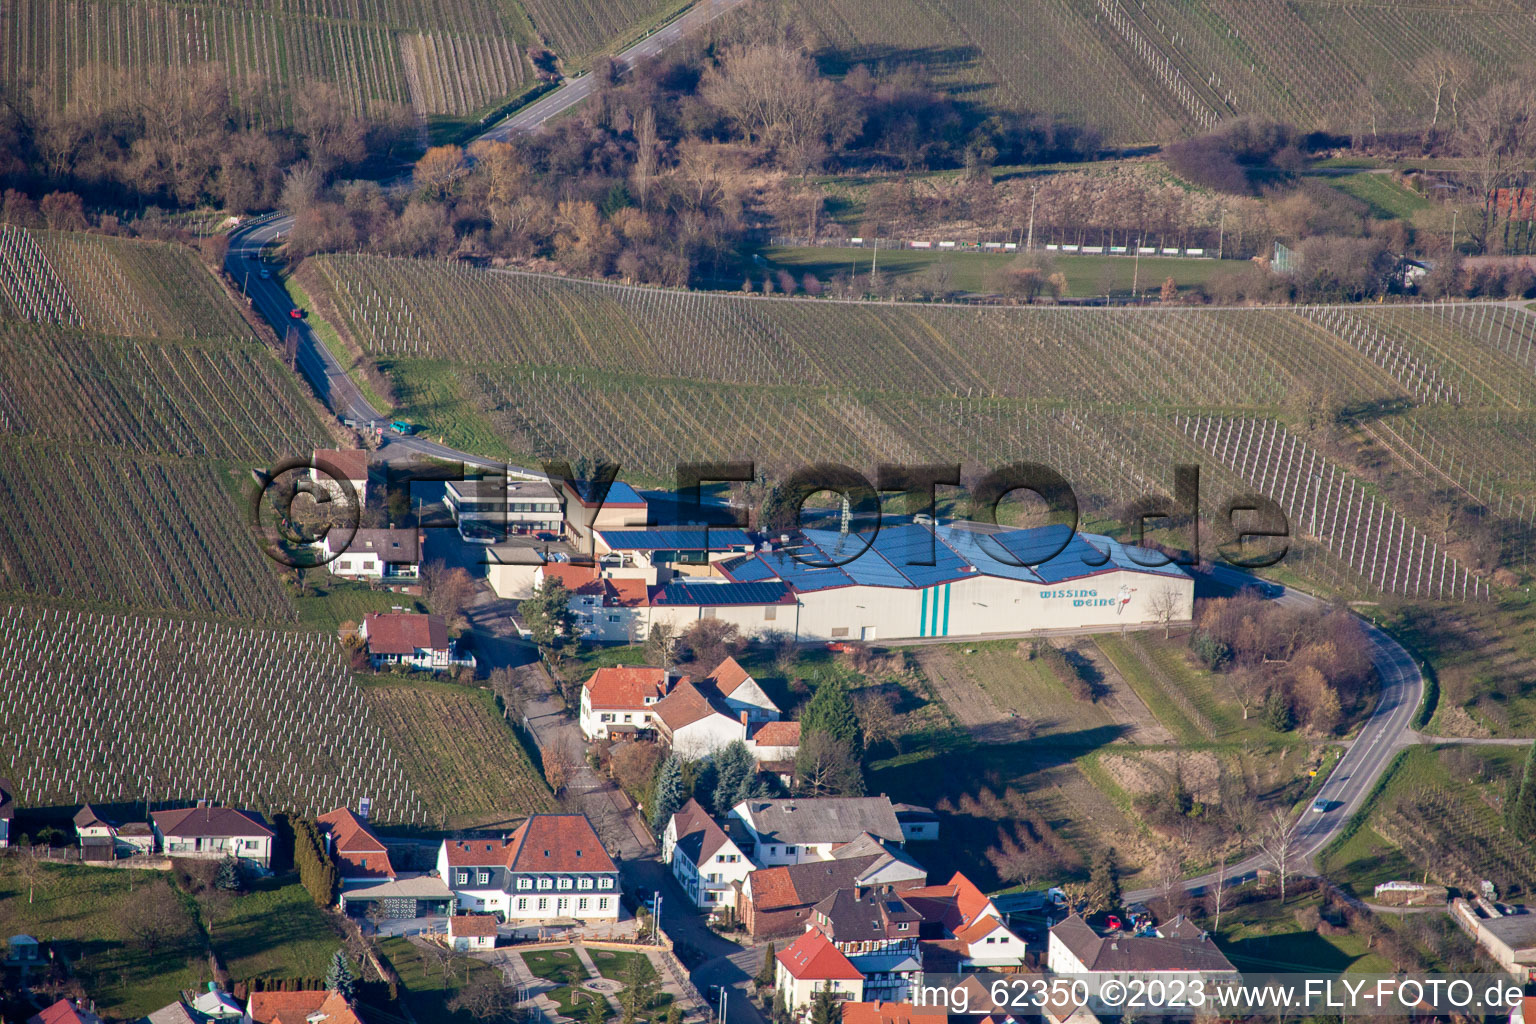 Wissing wines in Oberotterbach in the state Rhineland-Palatinate, Germany from above